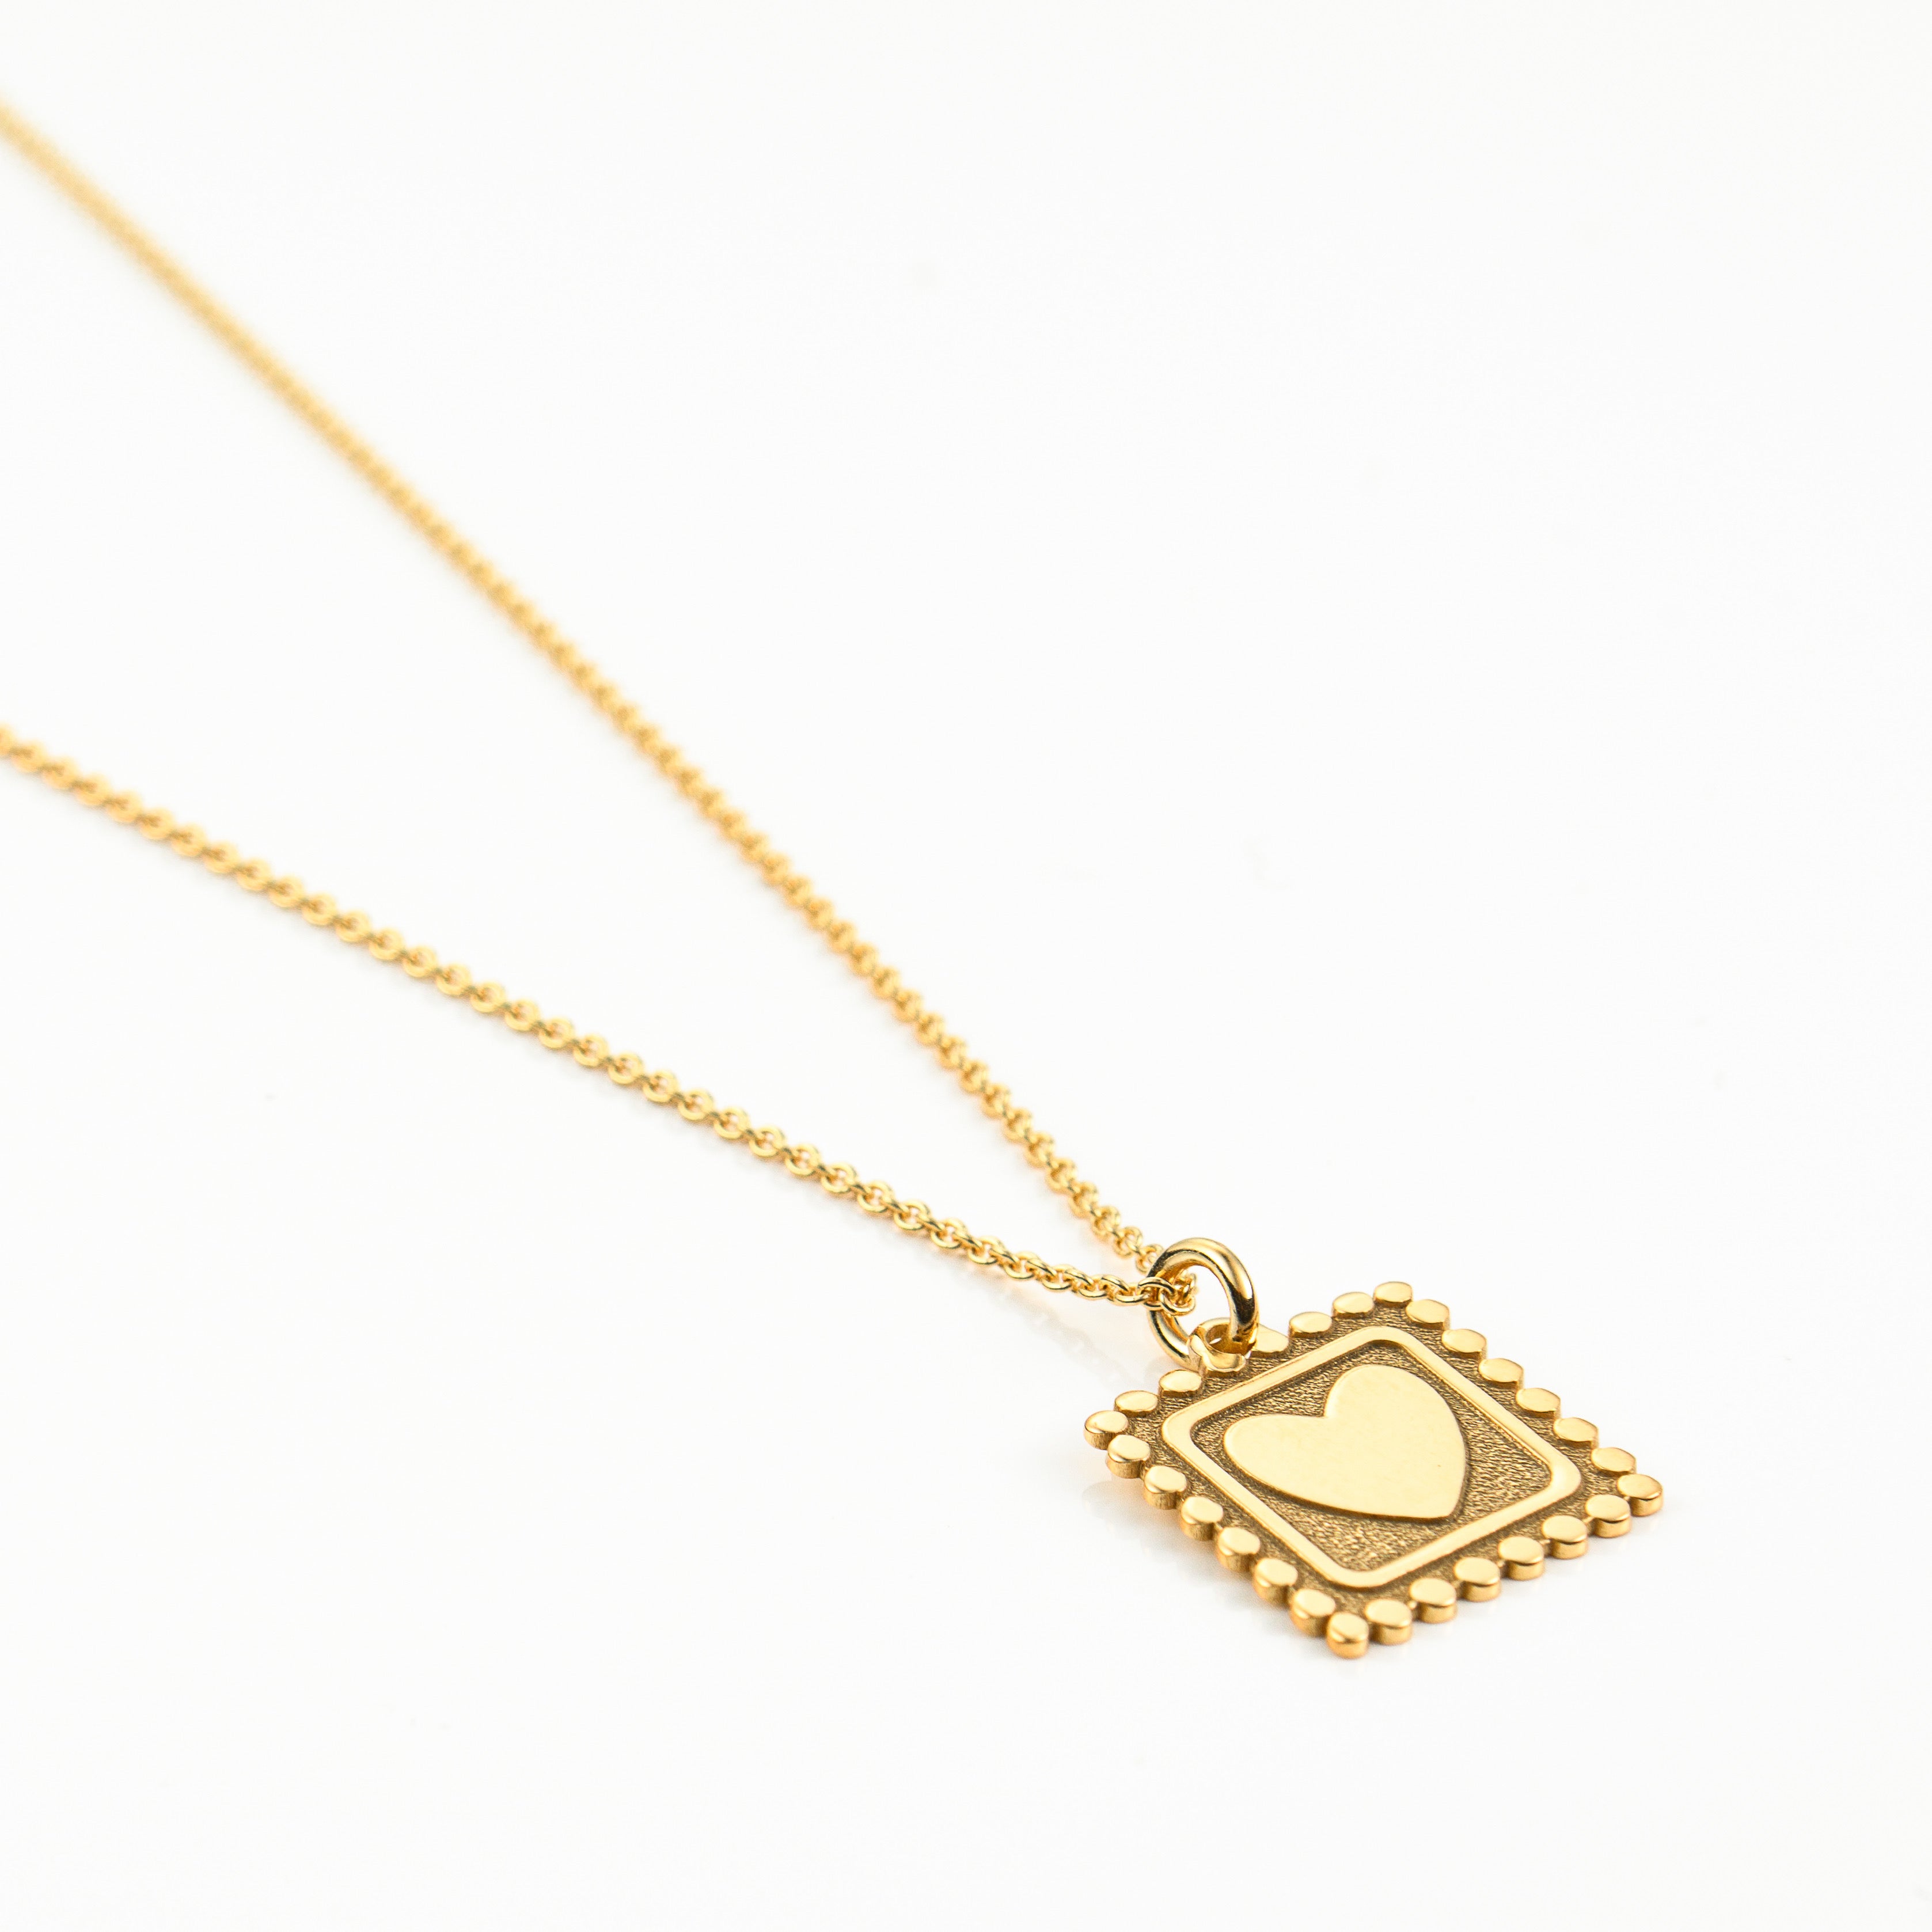 Lost in Love Necklace, gold plated